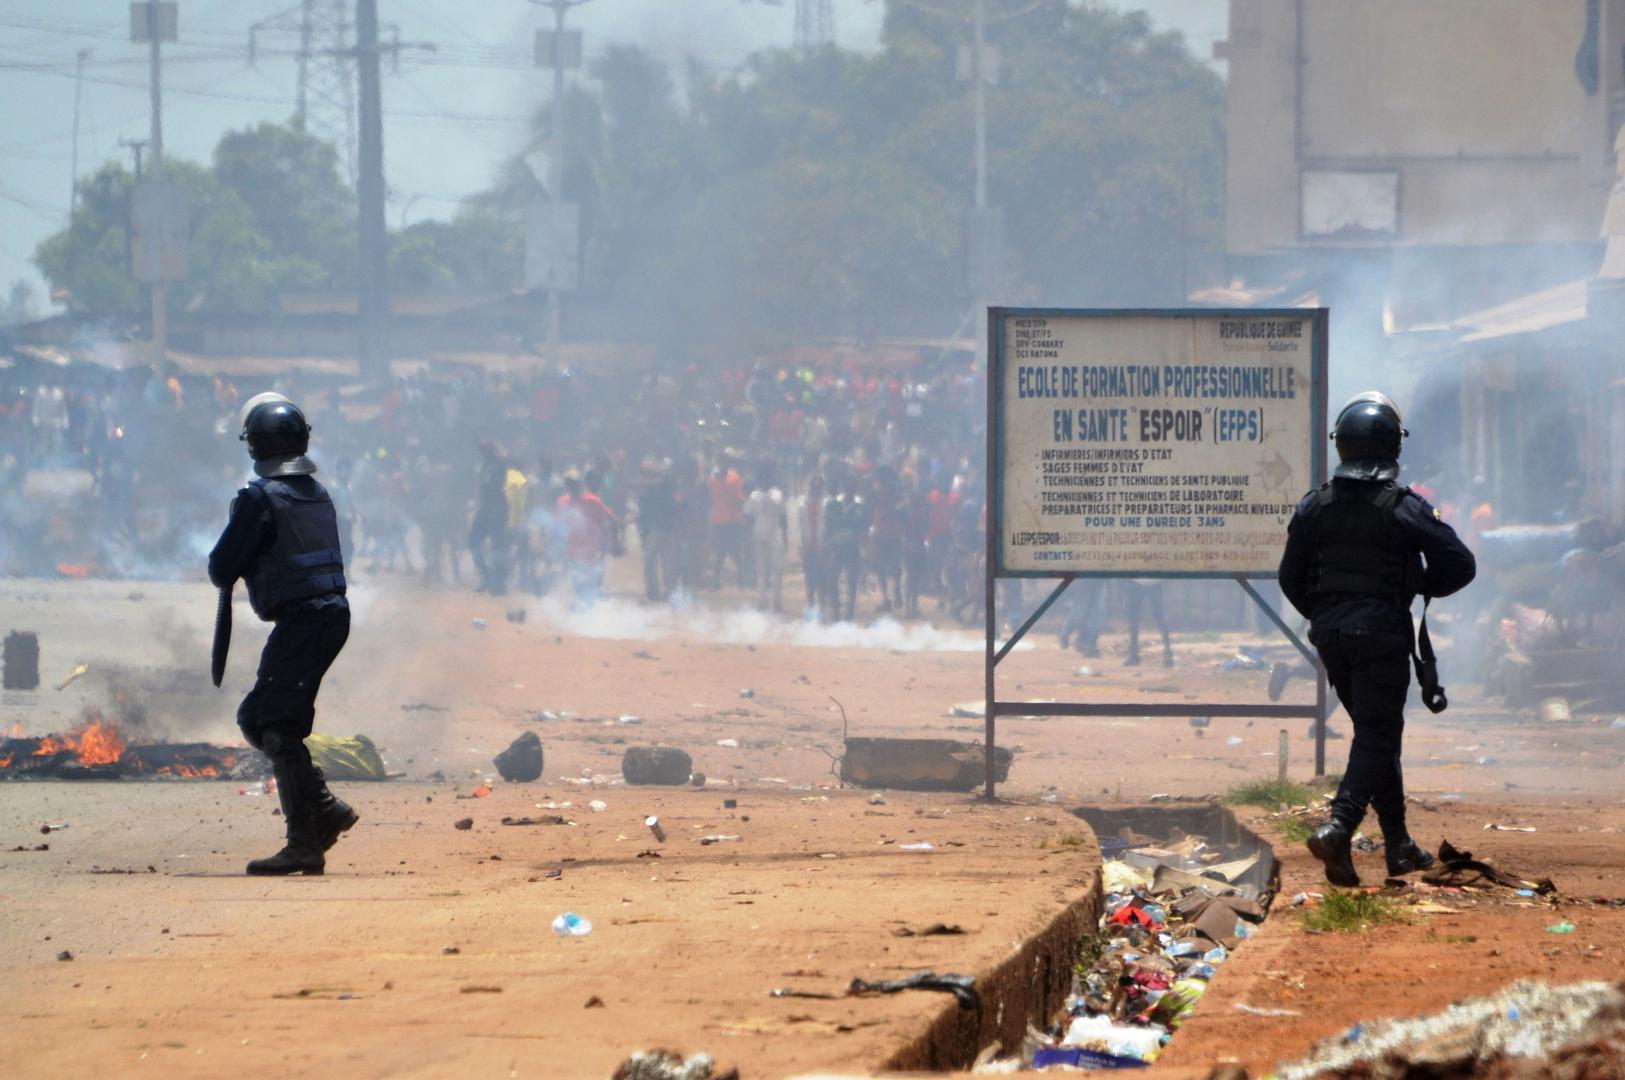 Anti-riot police clash with Guinean opposition supporters in Conakry on March 22, 2018.